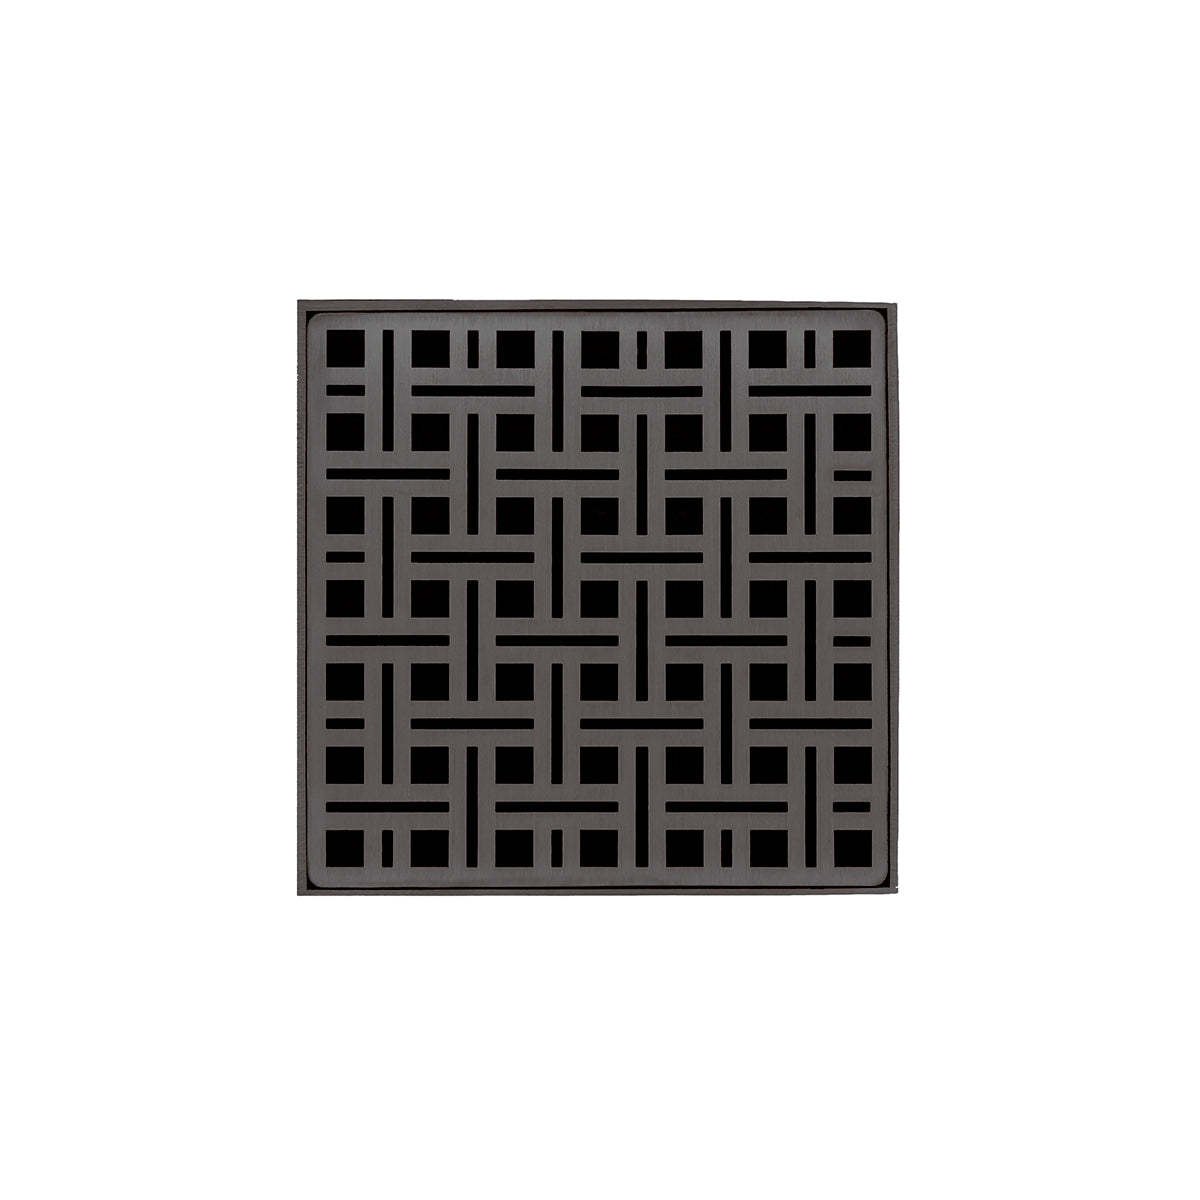 Infinity Drain 5" x 5" VD 5 Premium Center Drain Kit with Weave Pattern Decorative Plate with Cast Iron Drain Body, 2" Outlet